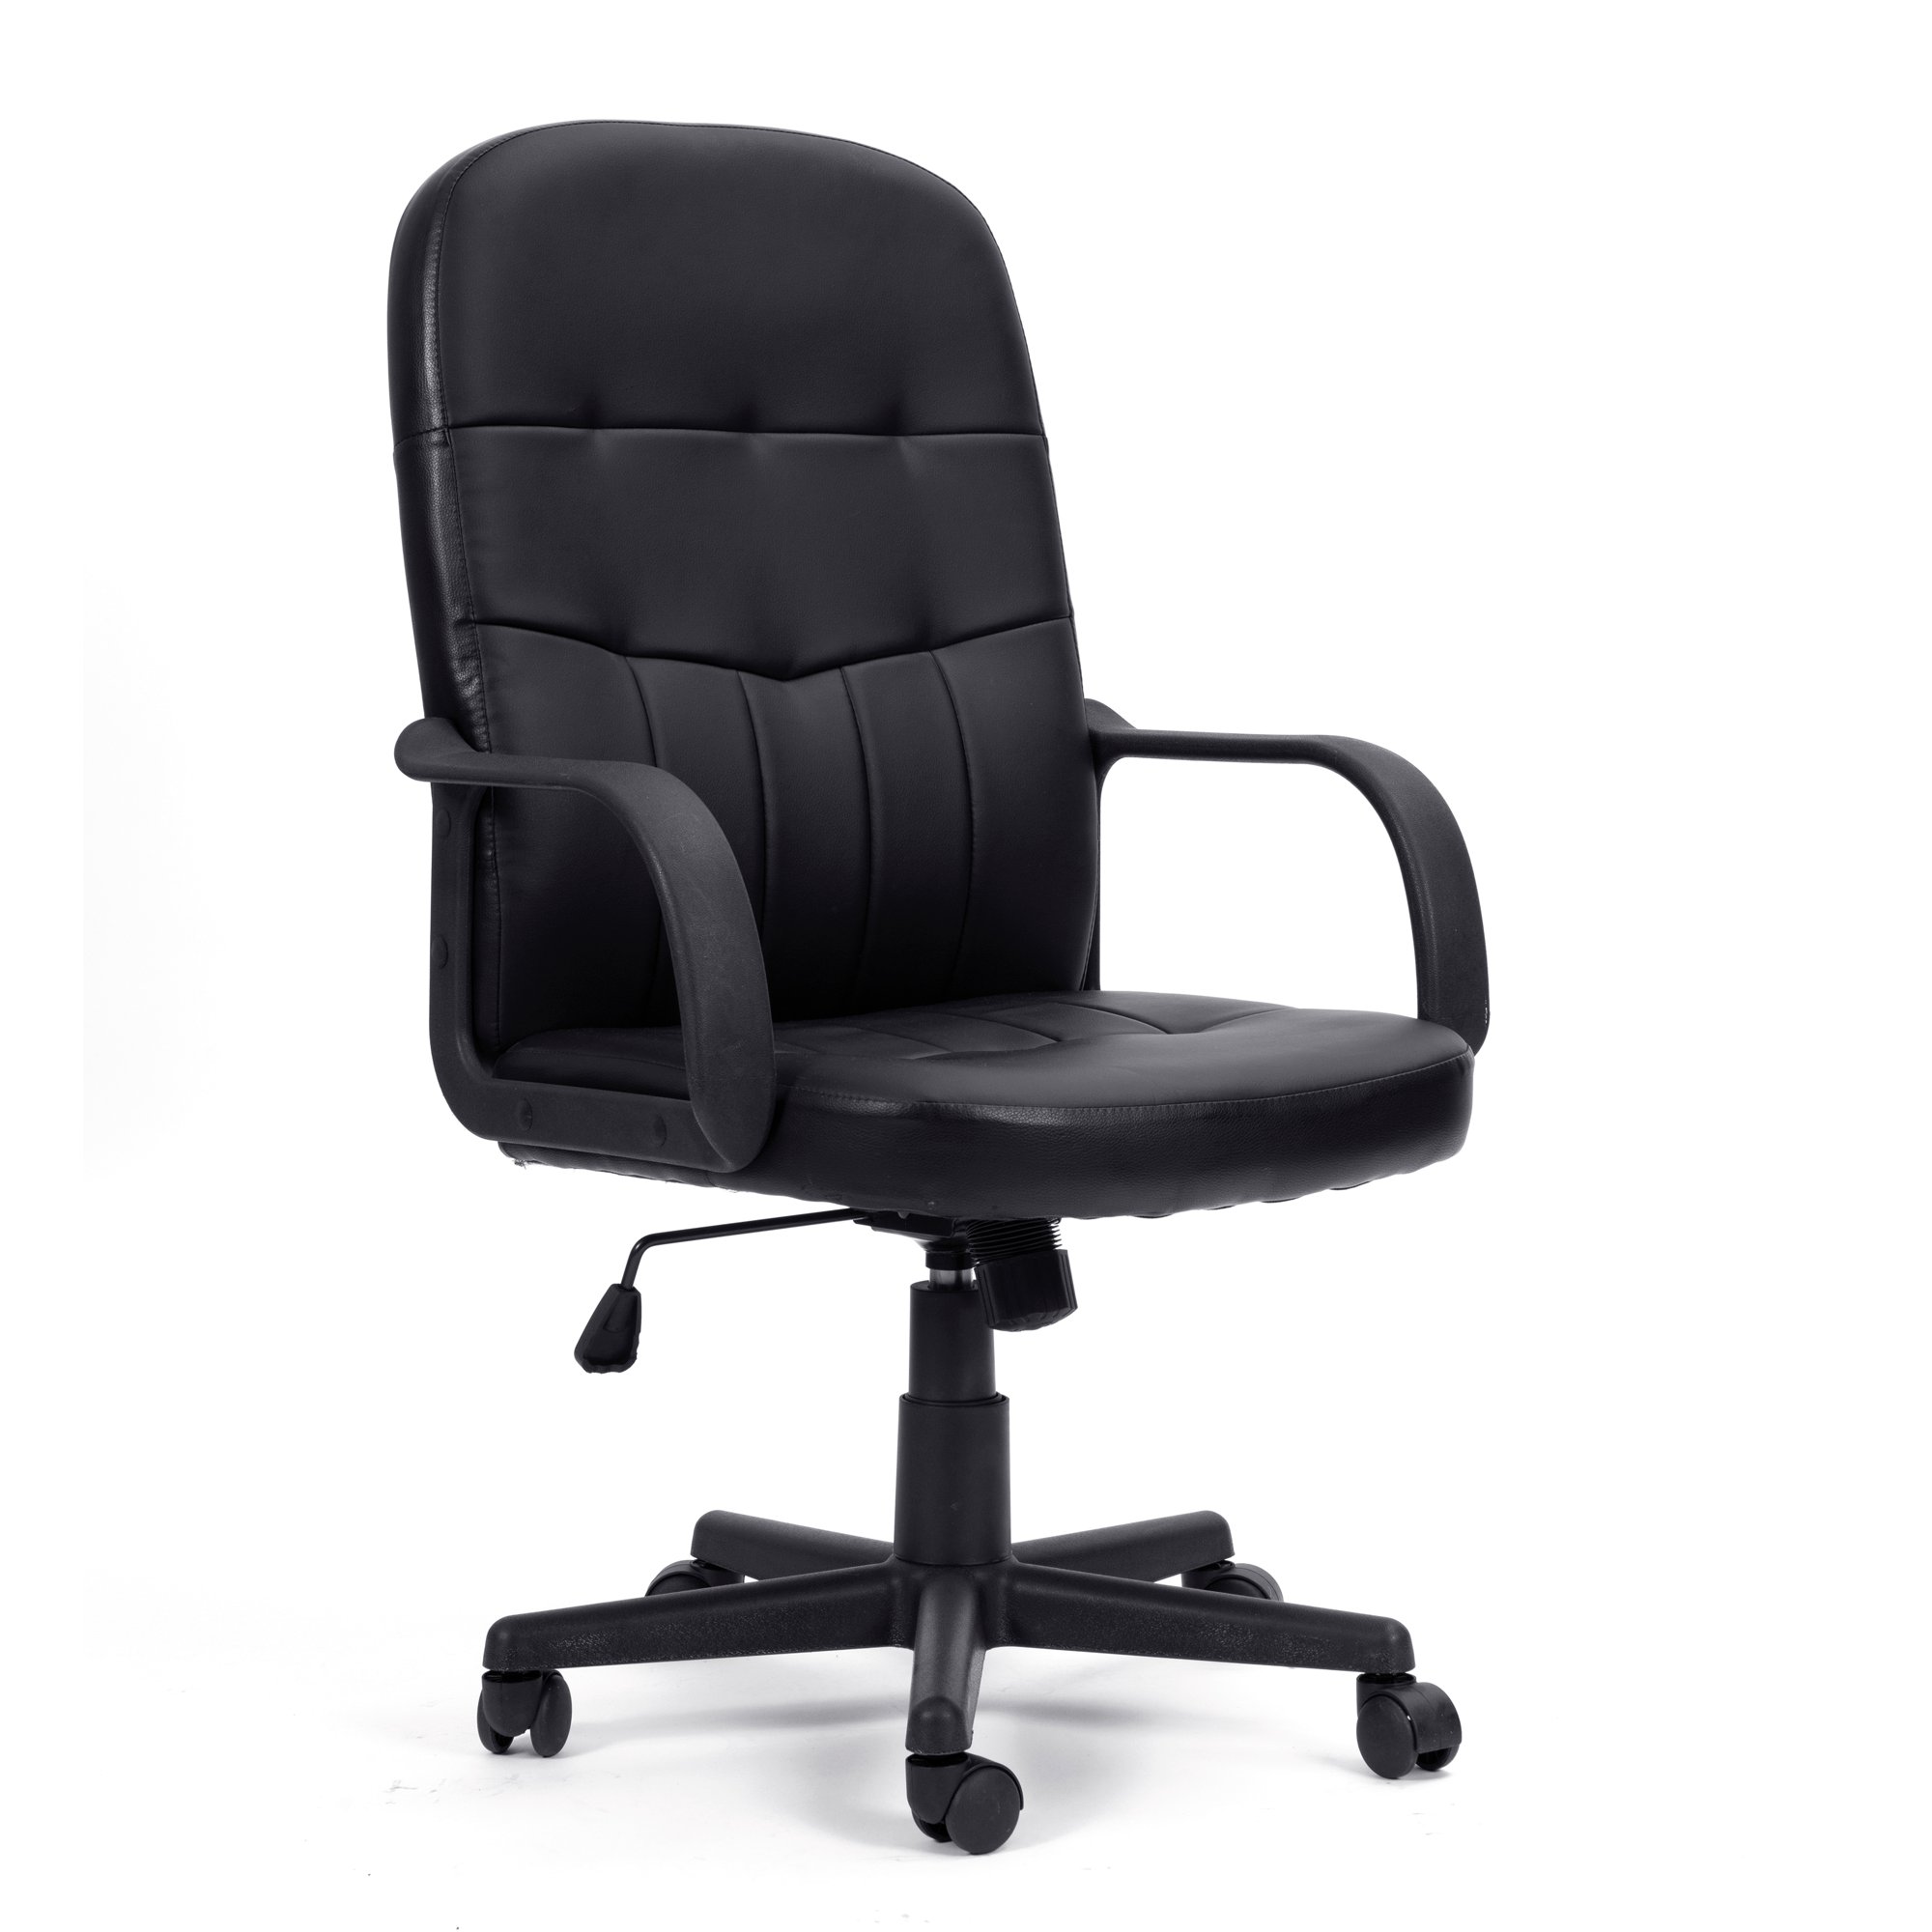 Nautilus Designs Orion High Back Bonded Leather Executive Office Chair With Inte